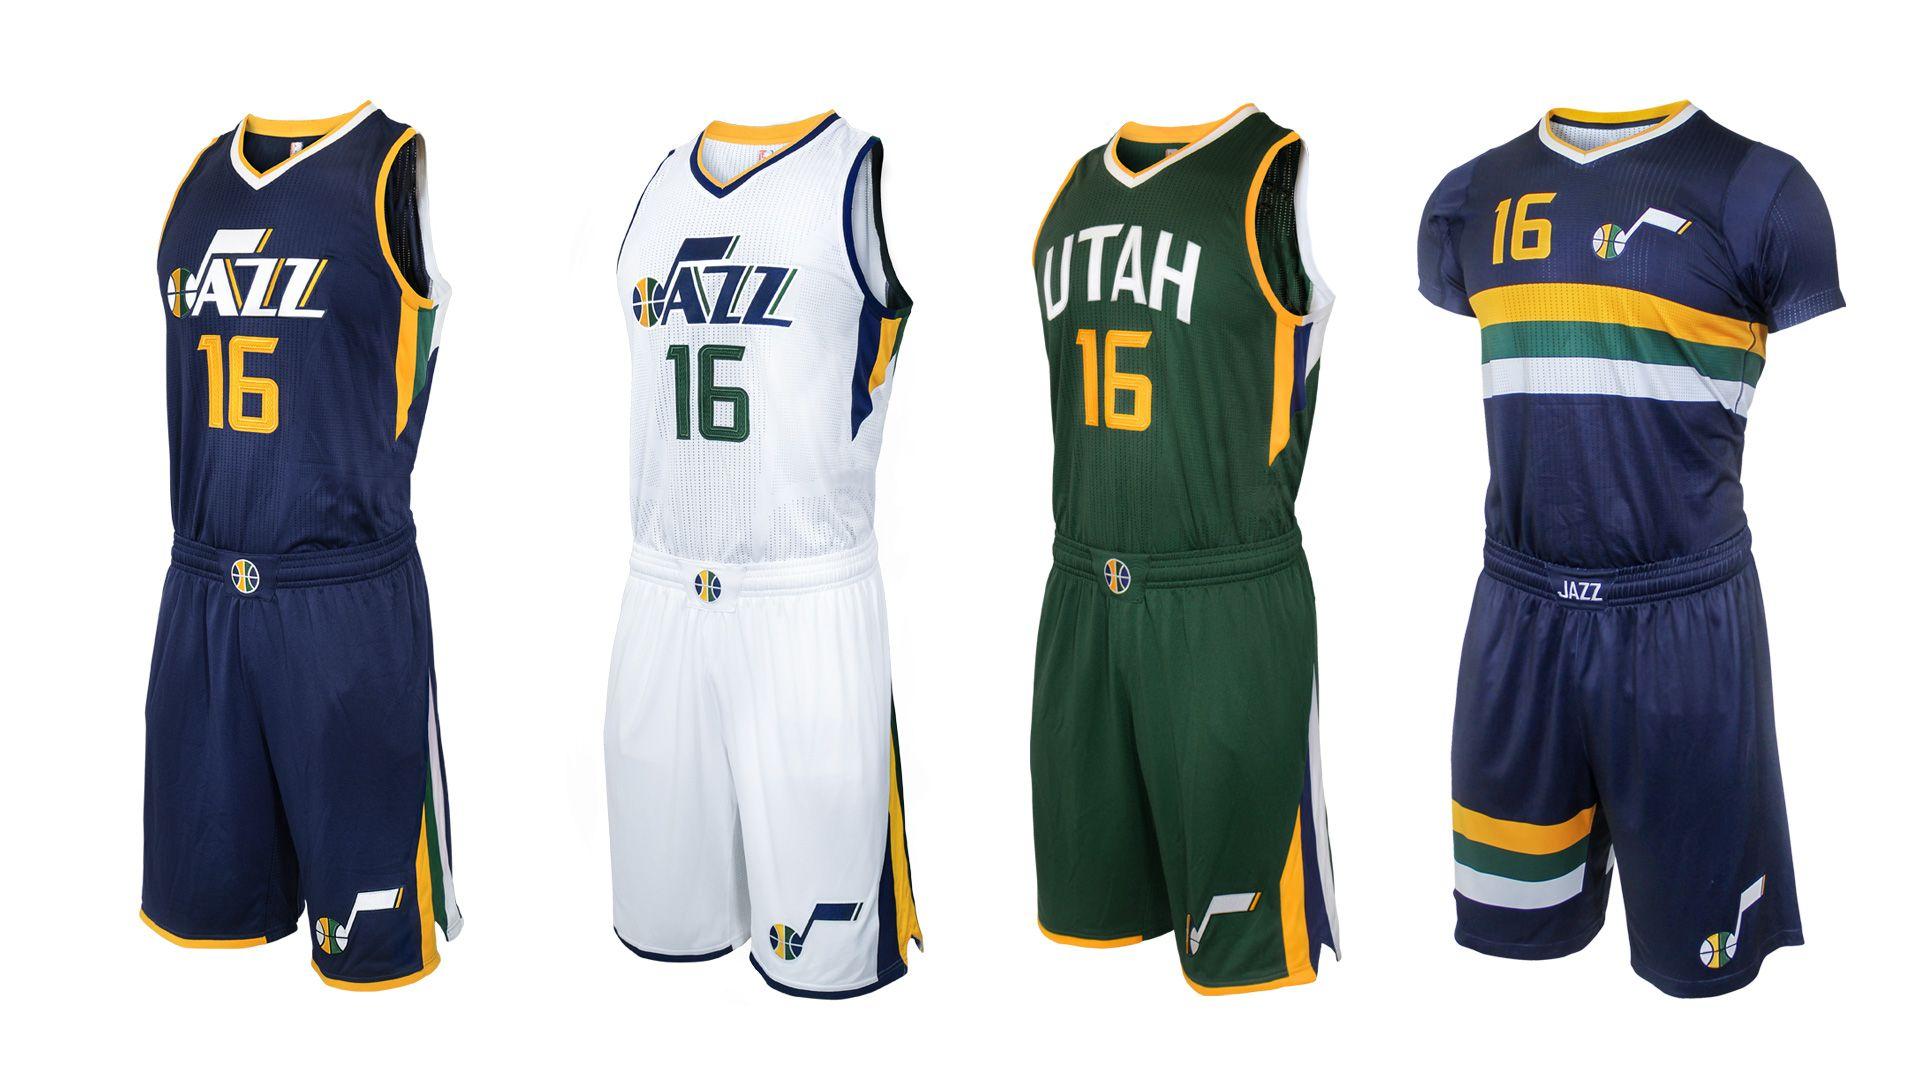 Utah Jazz reveals some new with hint of old in refresh to uniforms